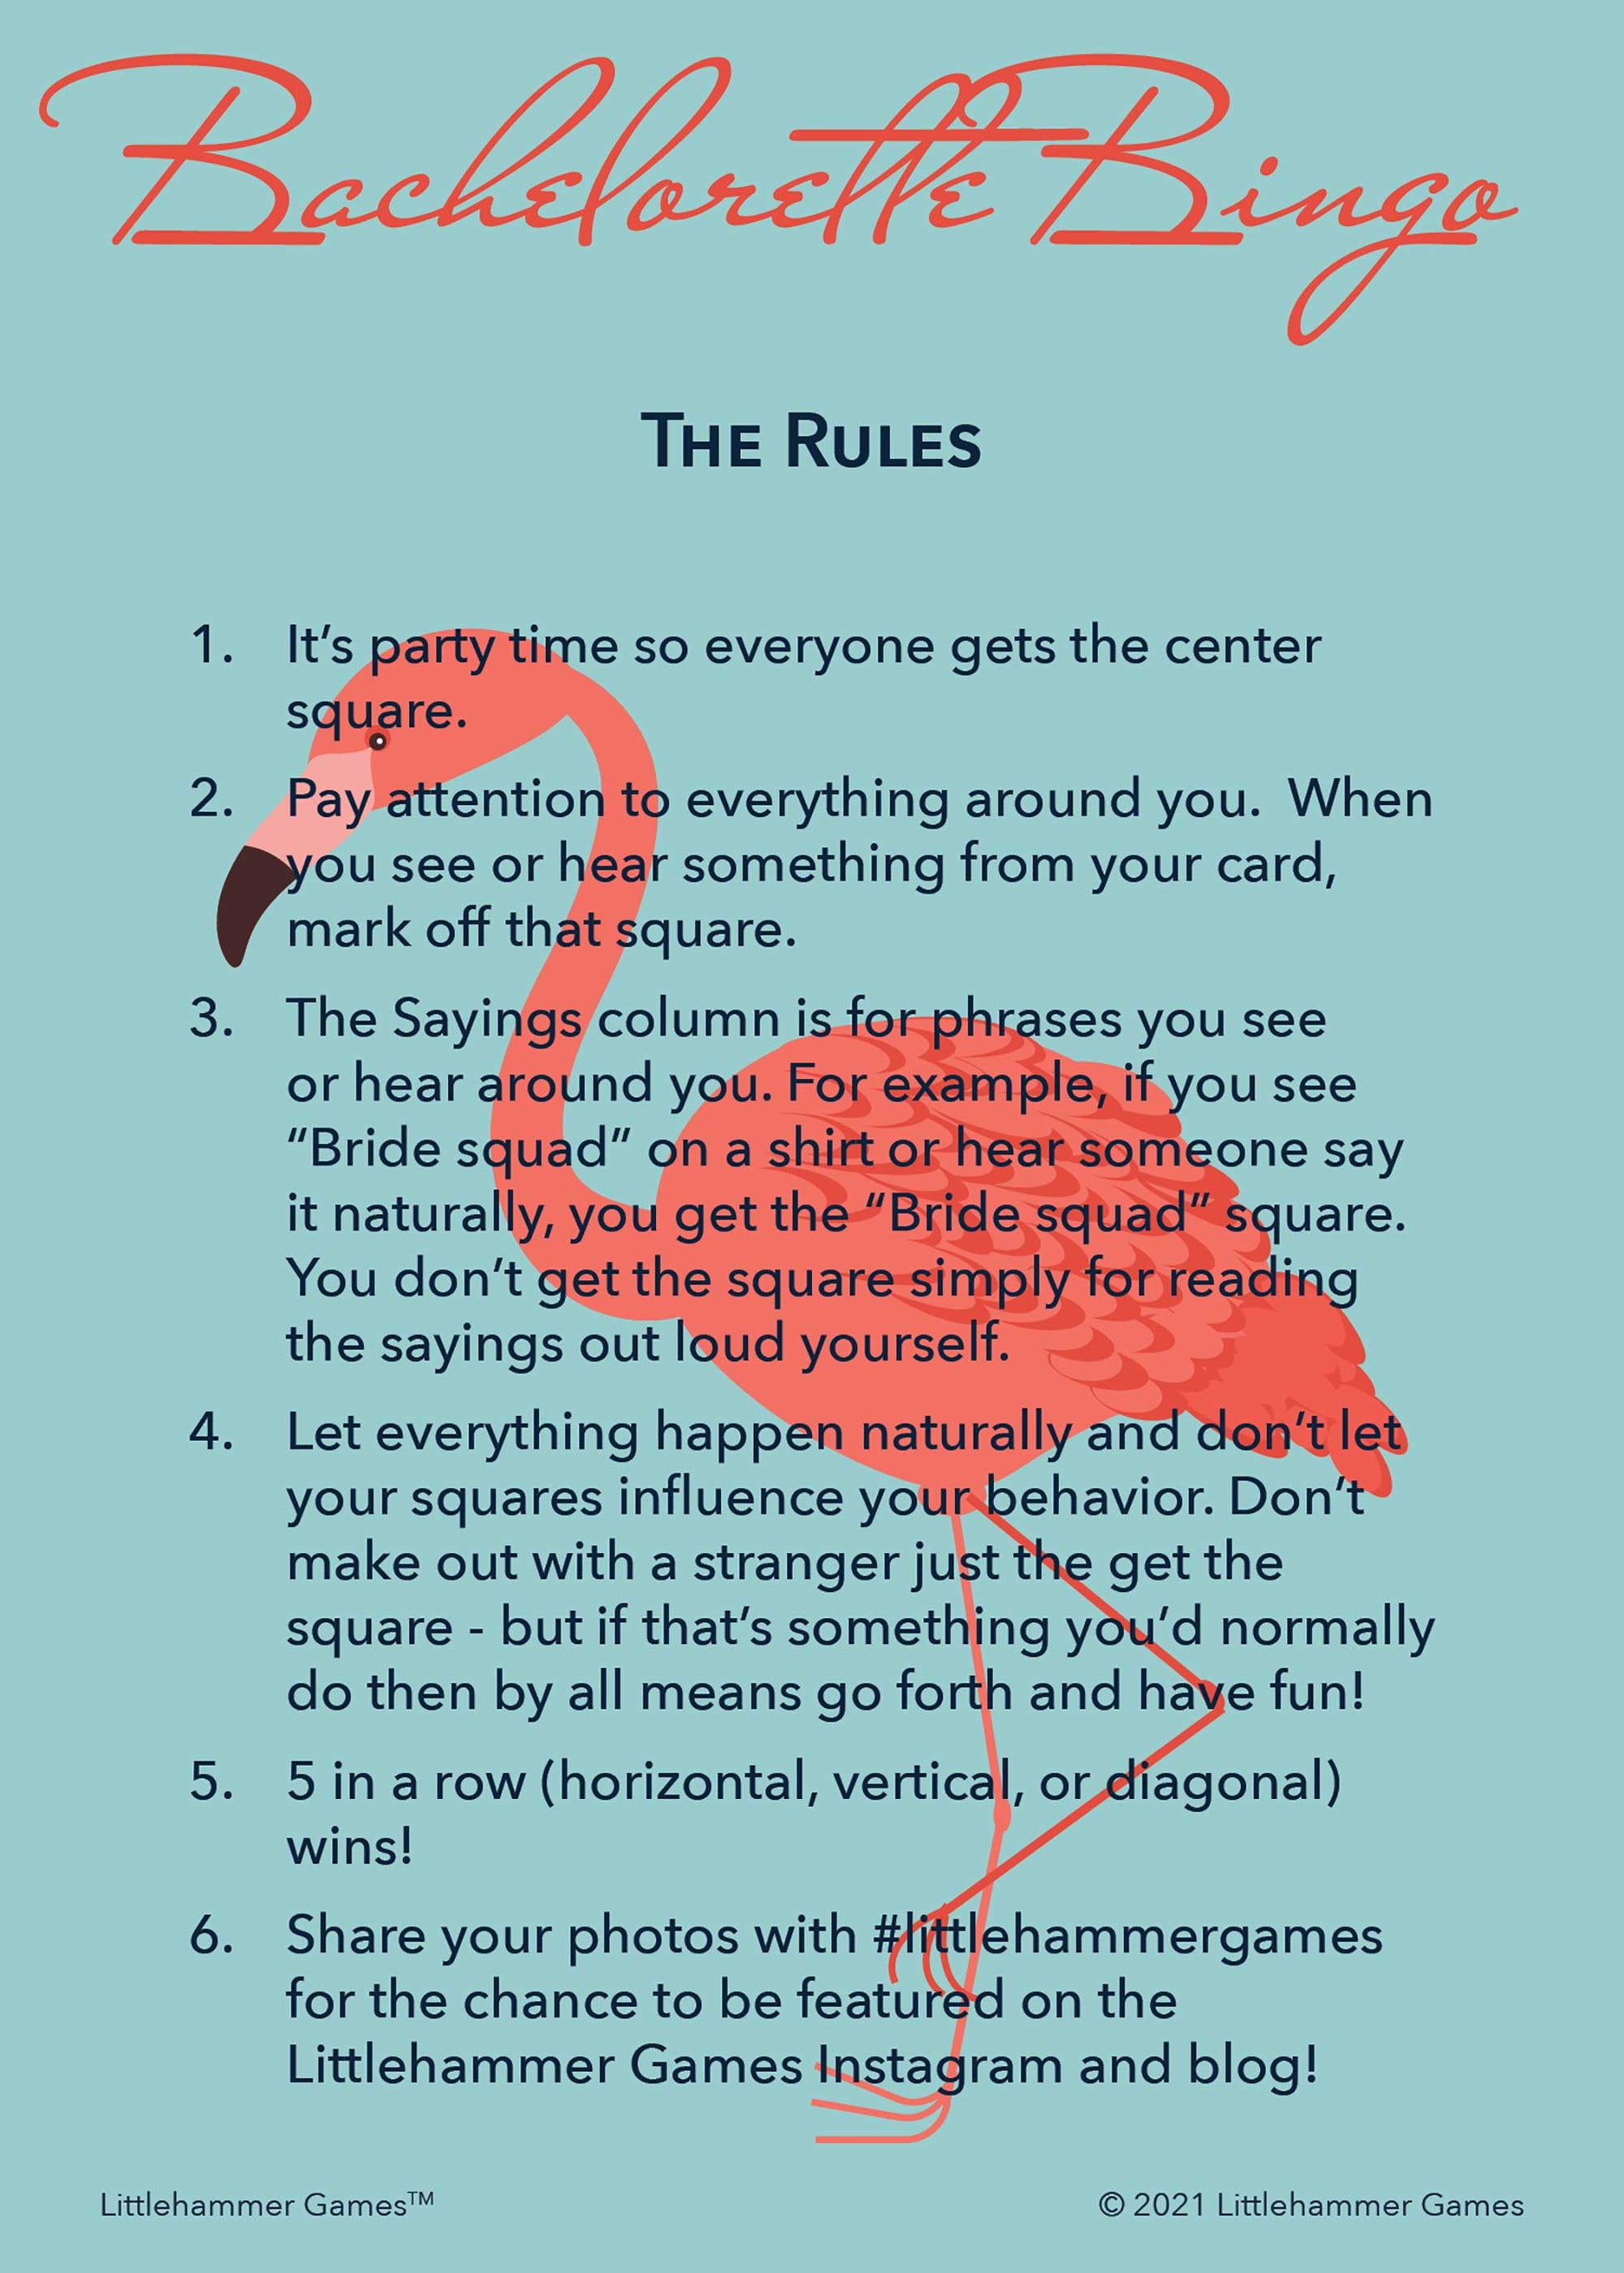 Bachelorette Bingo rules card with a bright flamingo on a blue background